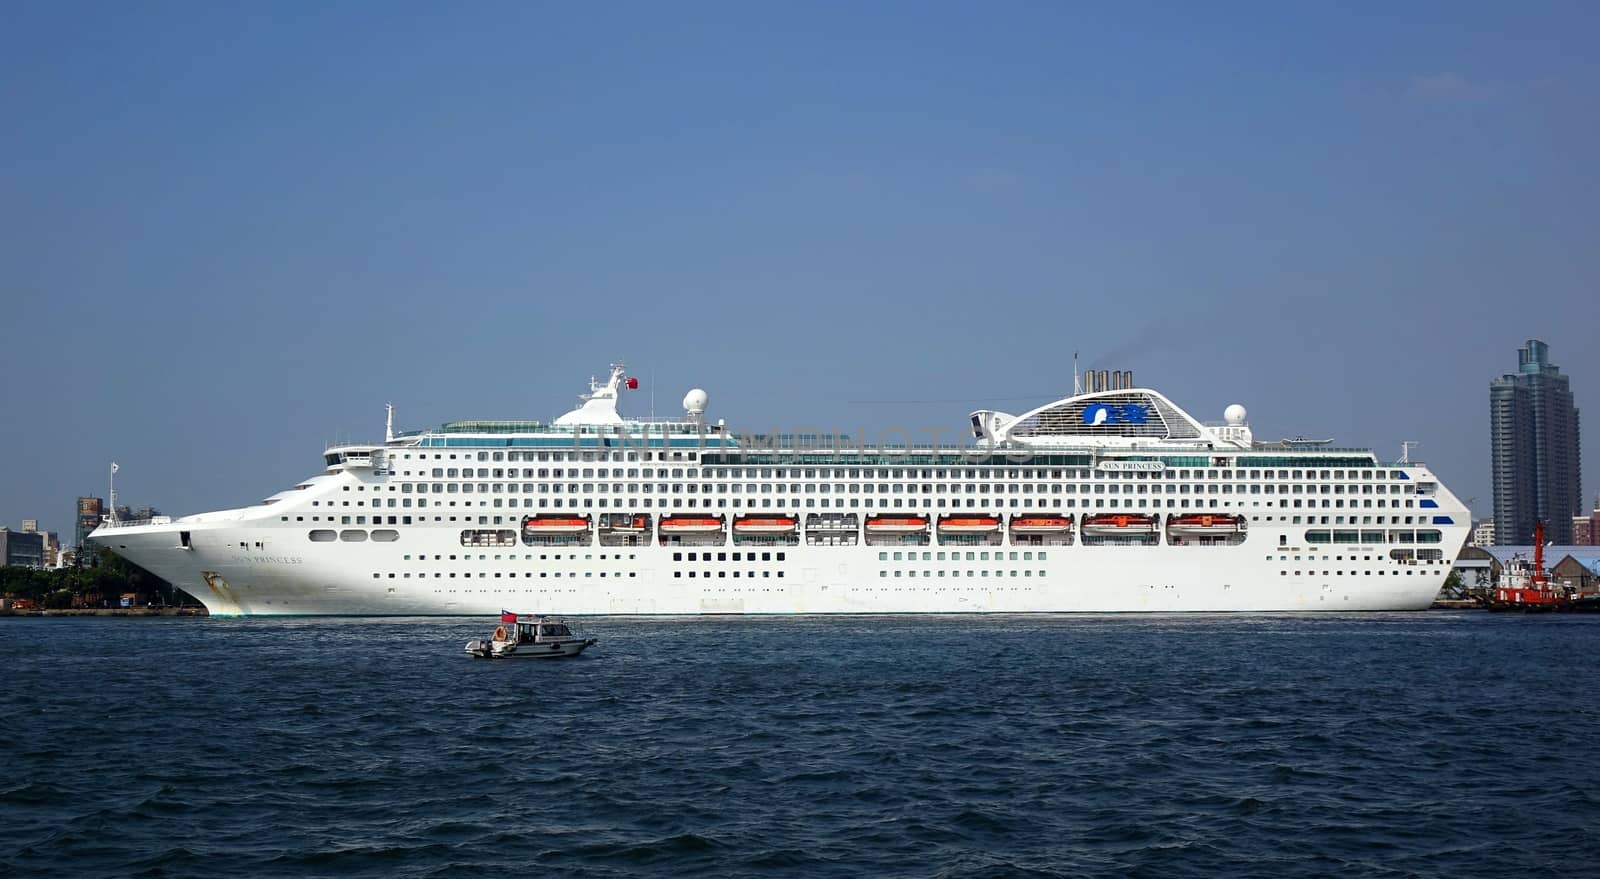 KAOHSIUNG, TAIWAN -- OCTOBER 11, 2014:  The cruise ship Sun Princess with more than 1000 guest cabins docks at Kaohsiung Harbor.